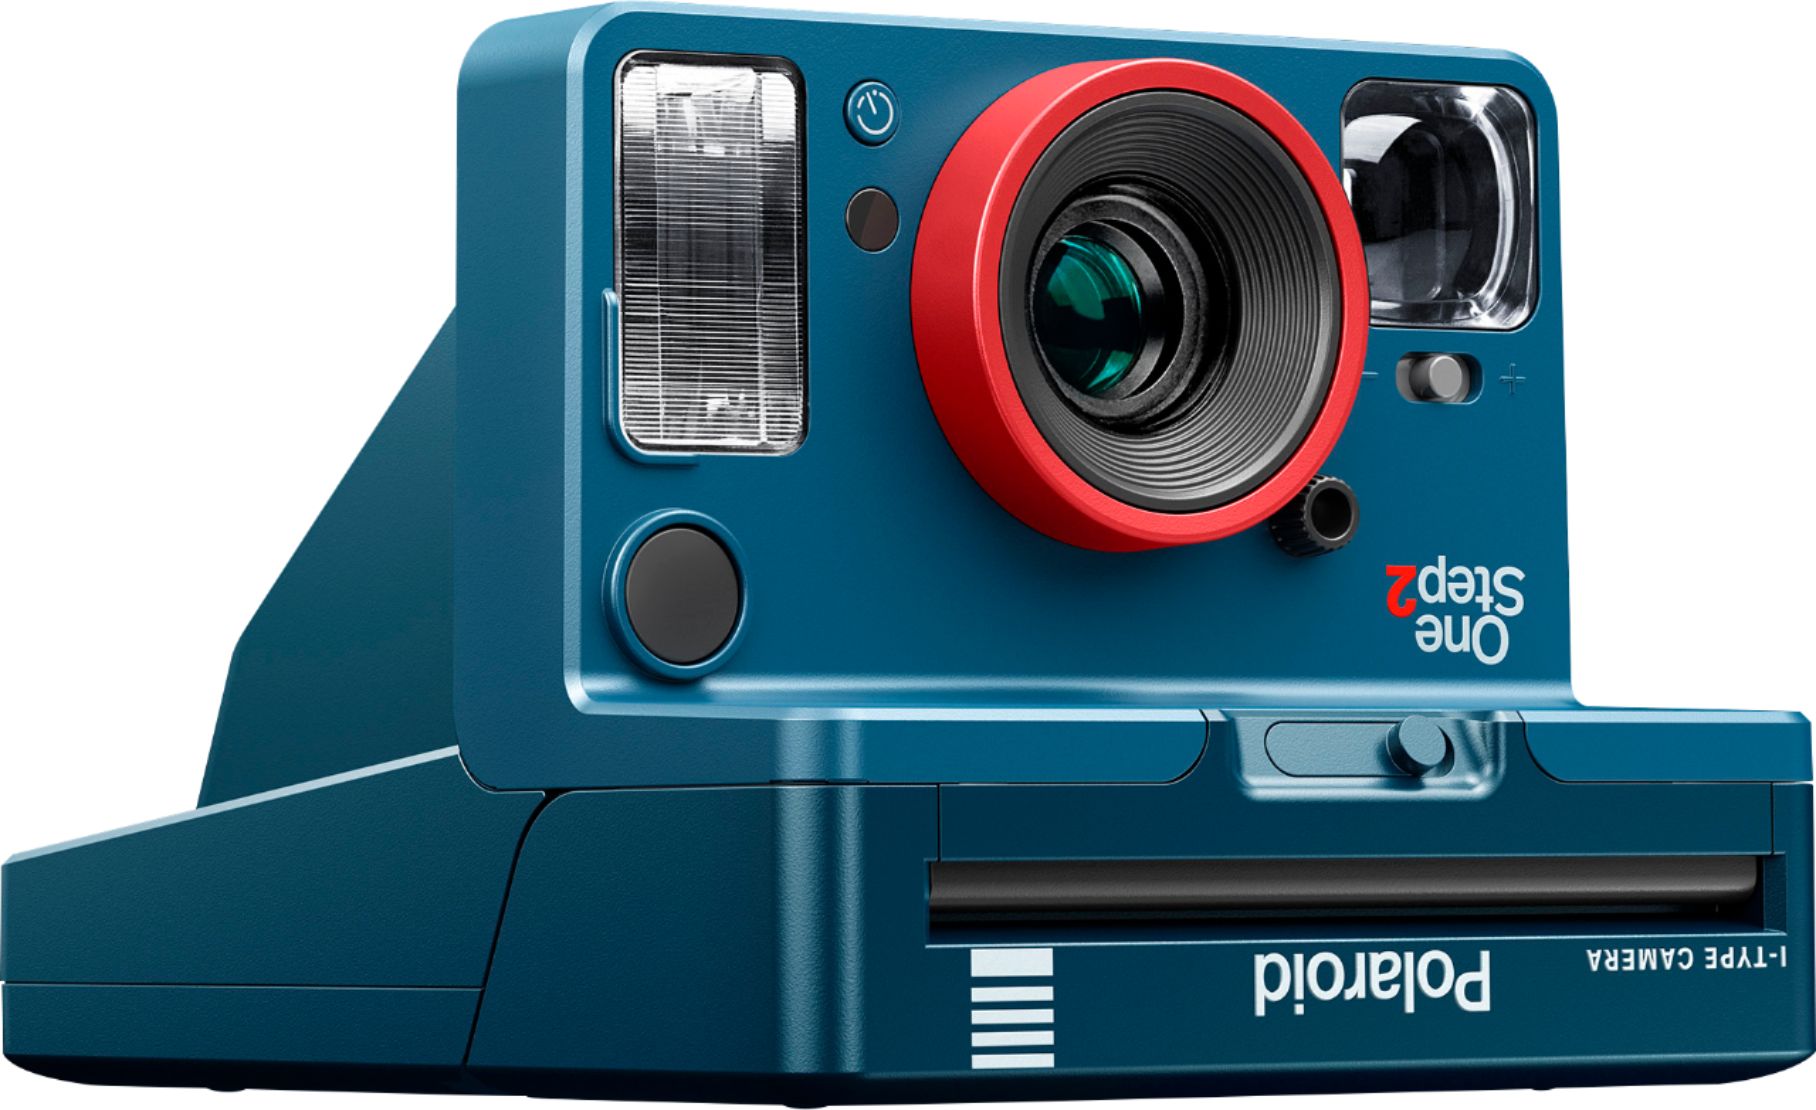 The Polaroid OneStep 2 instant film camera is $30 off at Best Buy